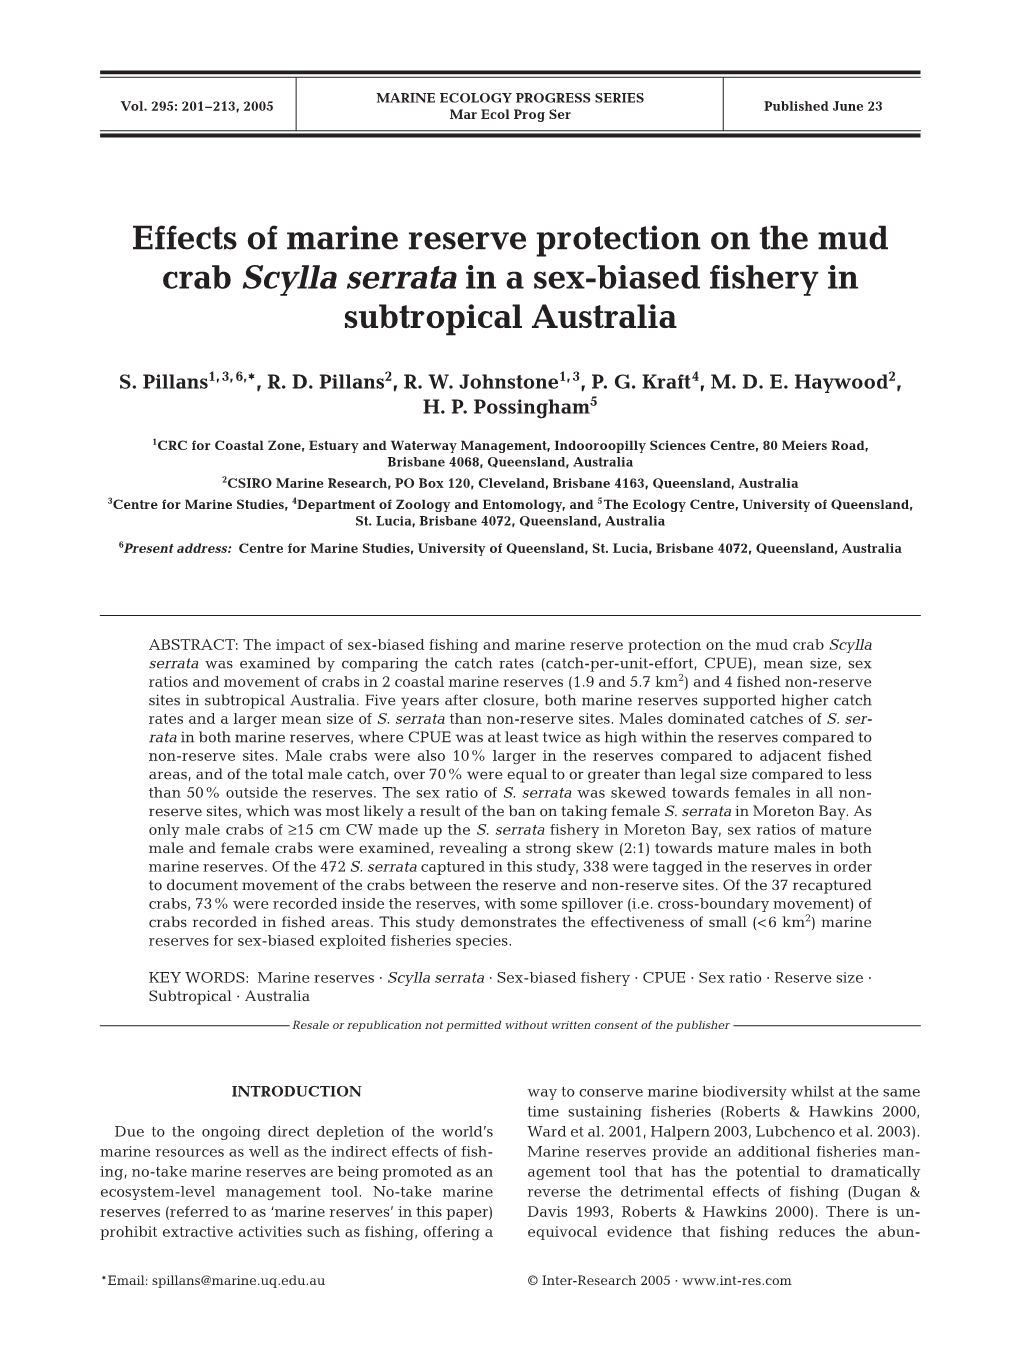 Effects of Marine Reserve Protection on the Mud Crab Scylla Serrata in a Sex-Biased Fishery in Subtropical Australia